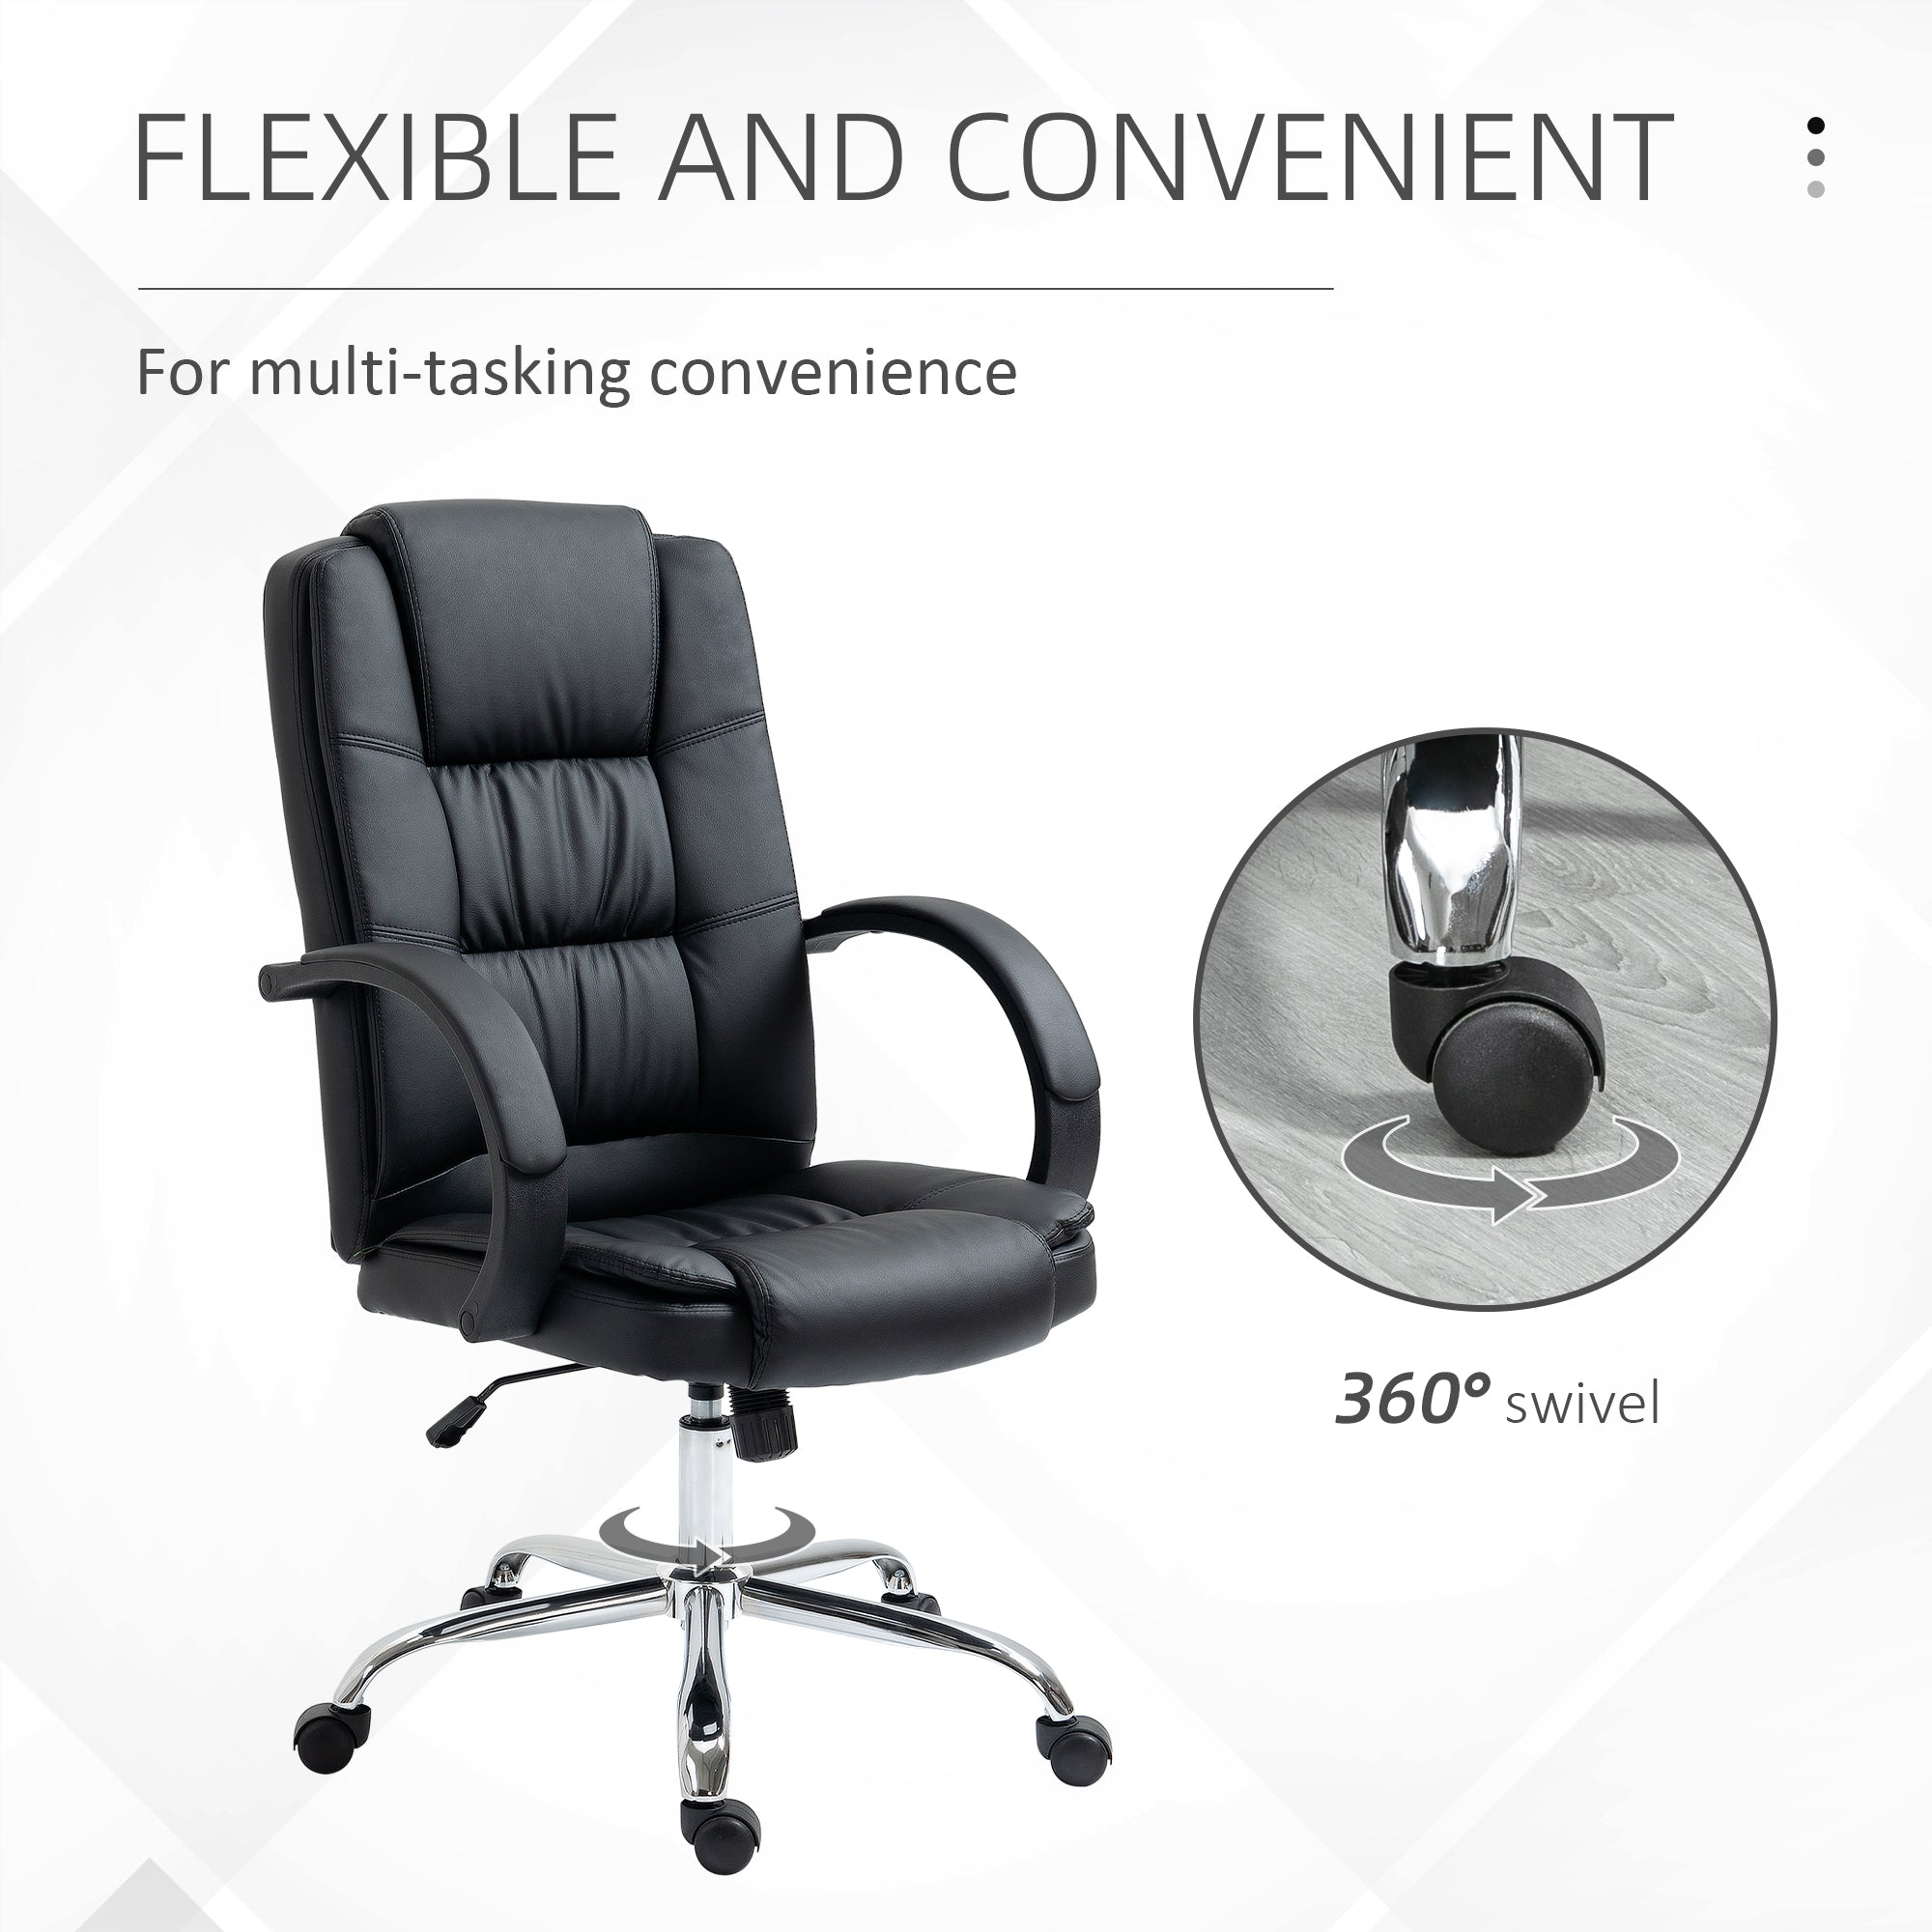 High Back Swivel Chair, PU Leather Executive Office Chair with Padded Armrests, Adjustable Height, Tilt Function, Black-4